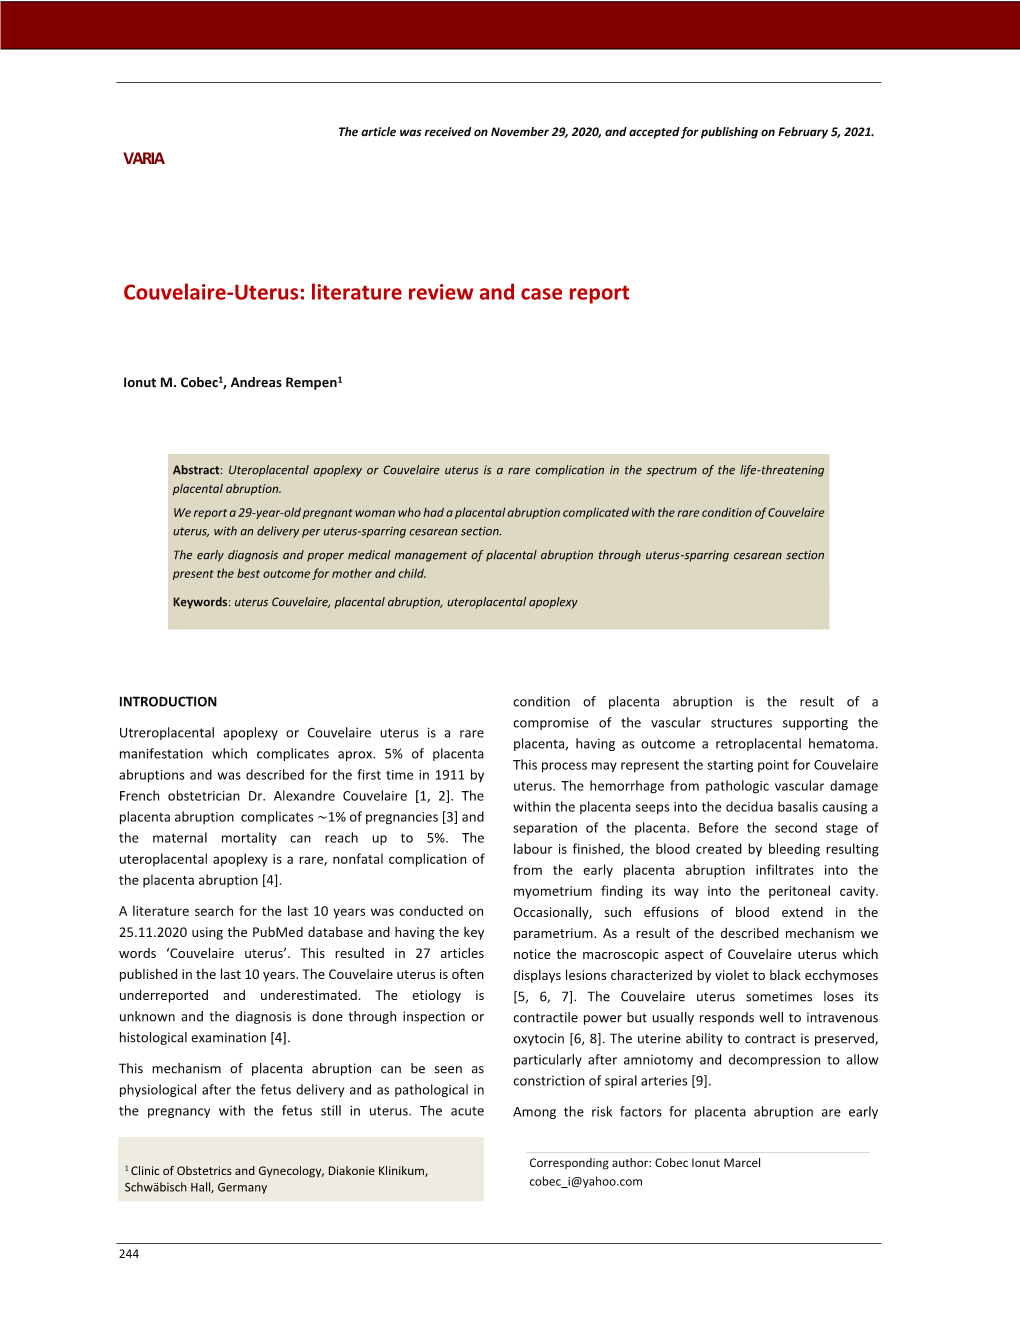 Couvelaire-Uterus: Literature Review and Case Report